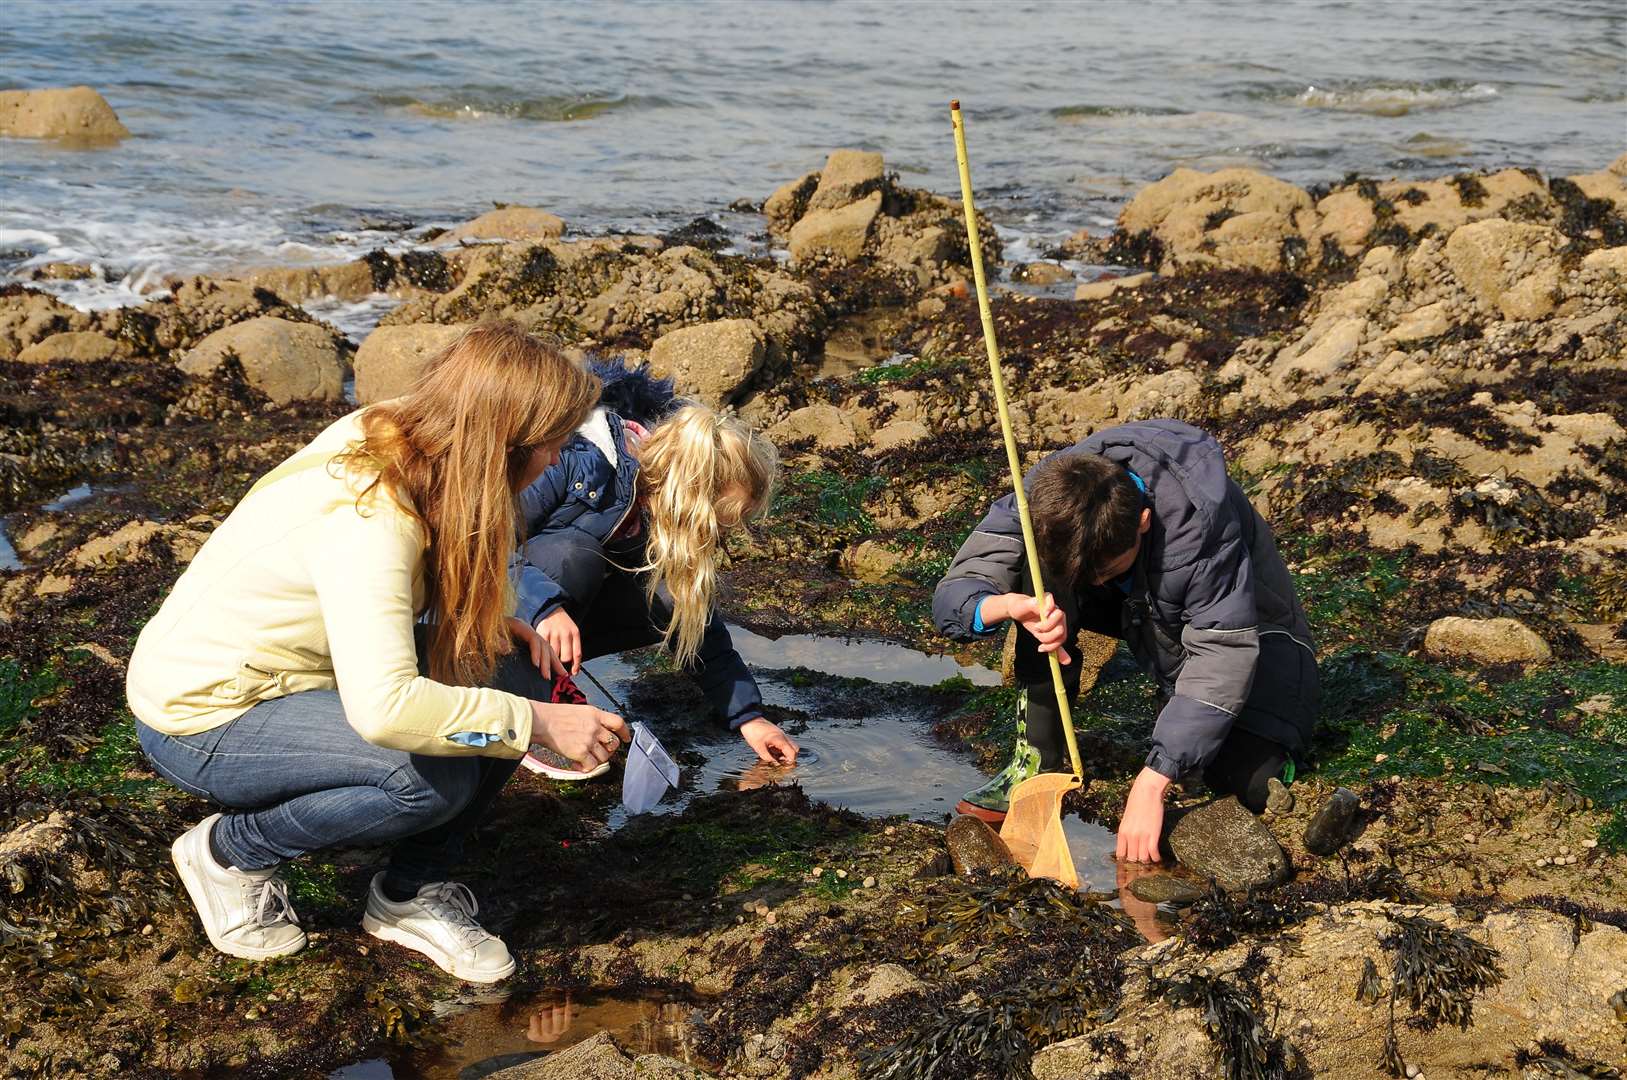 The trail allows families to become ocean explorers, delving deep into the world of rockpools.